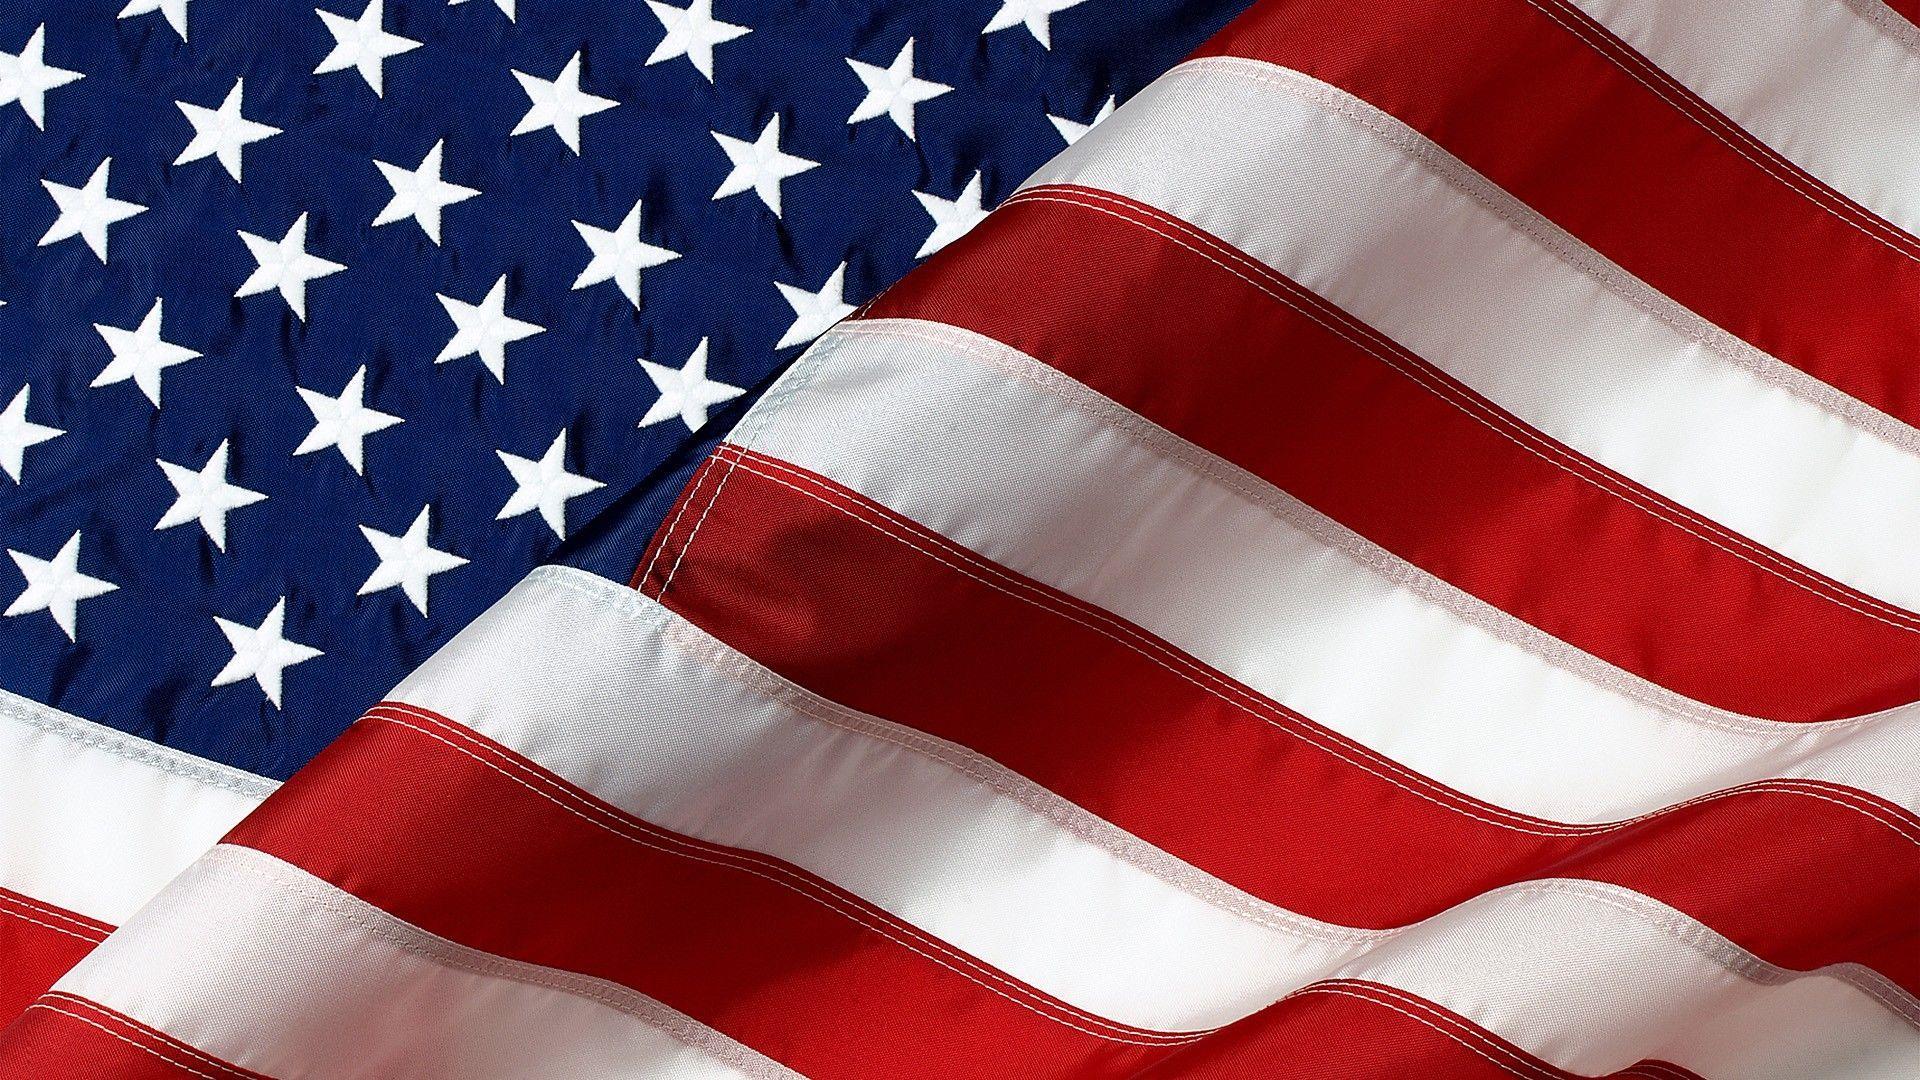 A School District Has Just BANNED The American Flag From Being